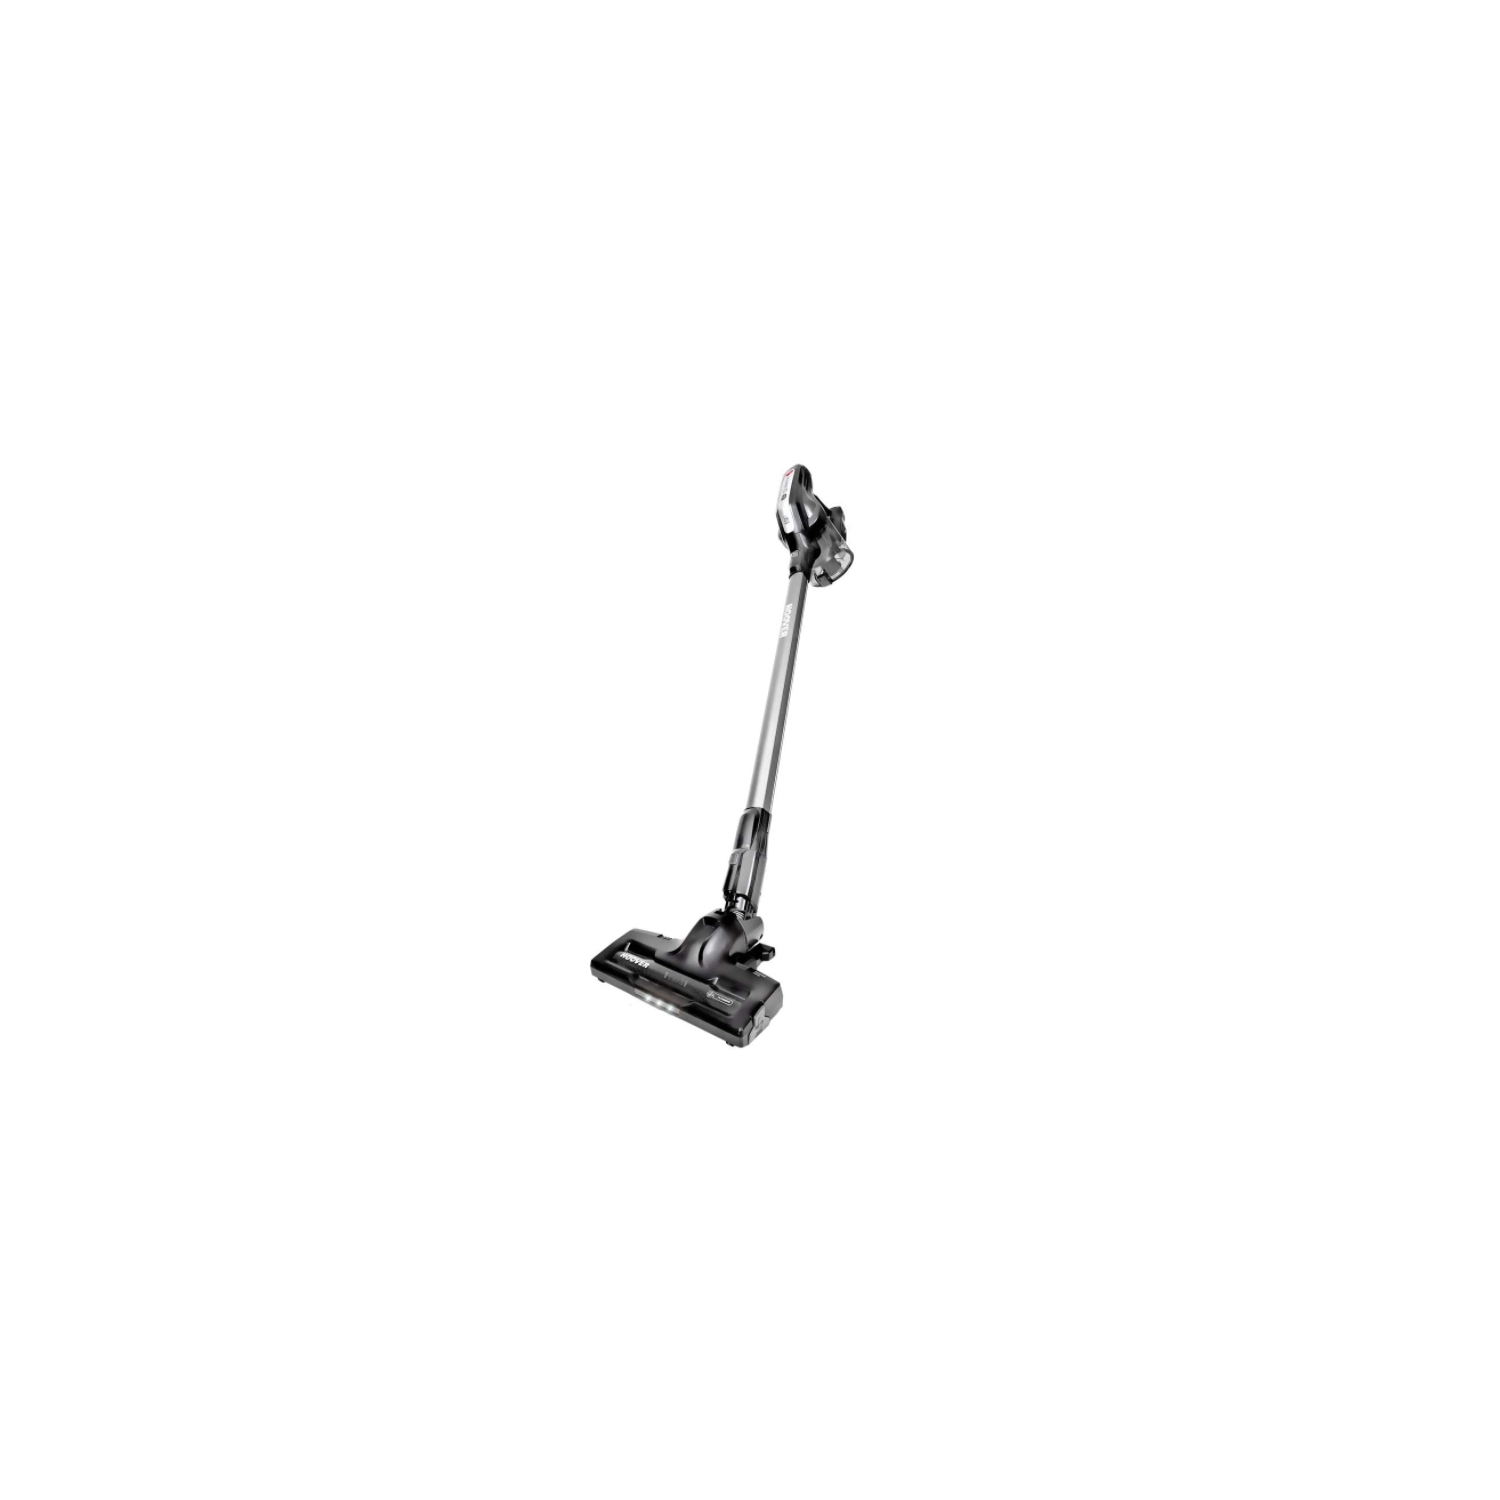 HOOVER HF18GHI MULTIFUNCTIONAL CORDLESS STICK CLEANER - 0